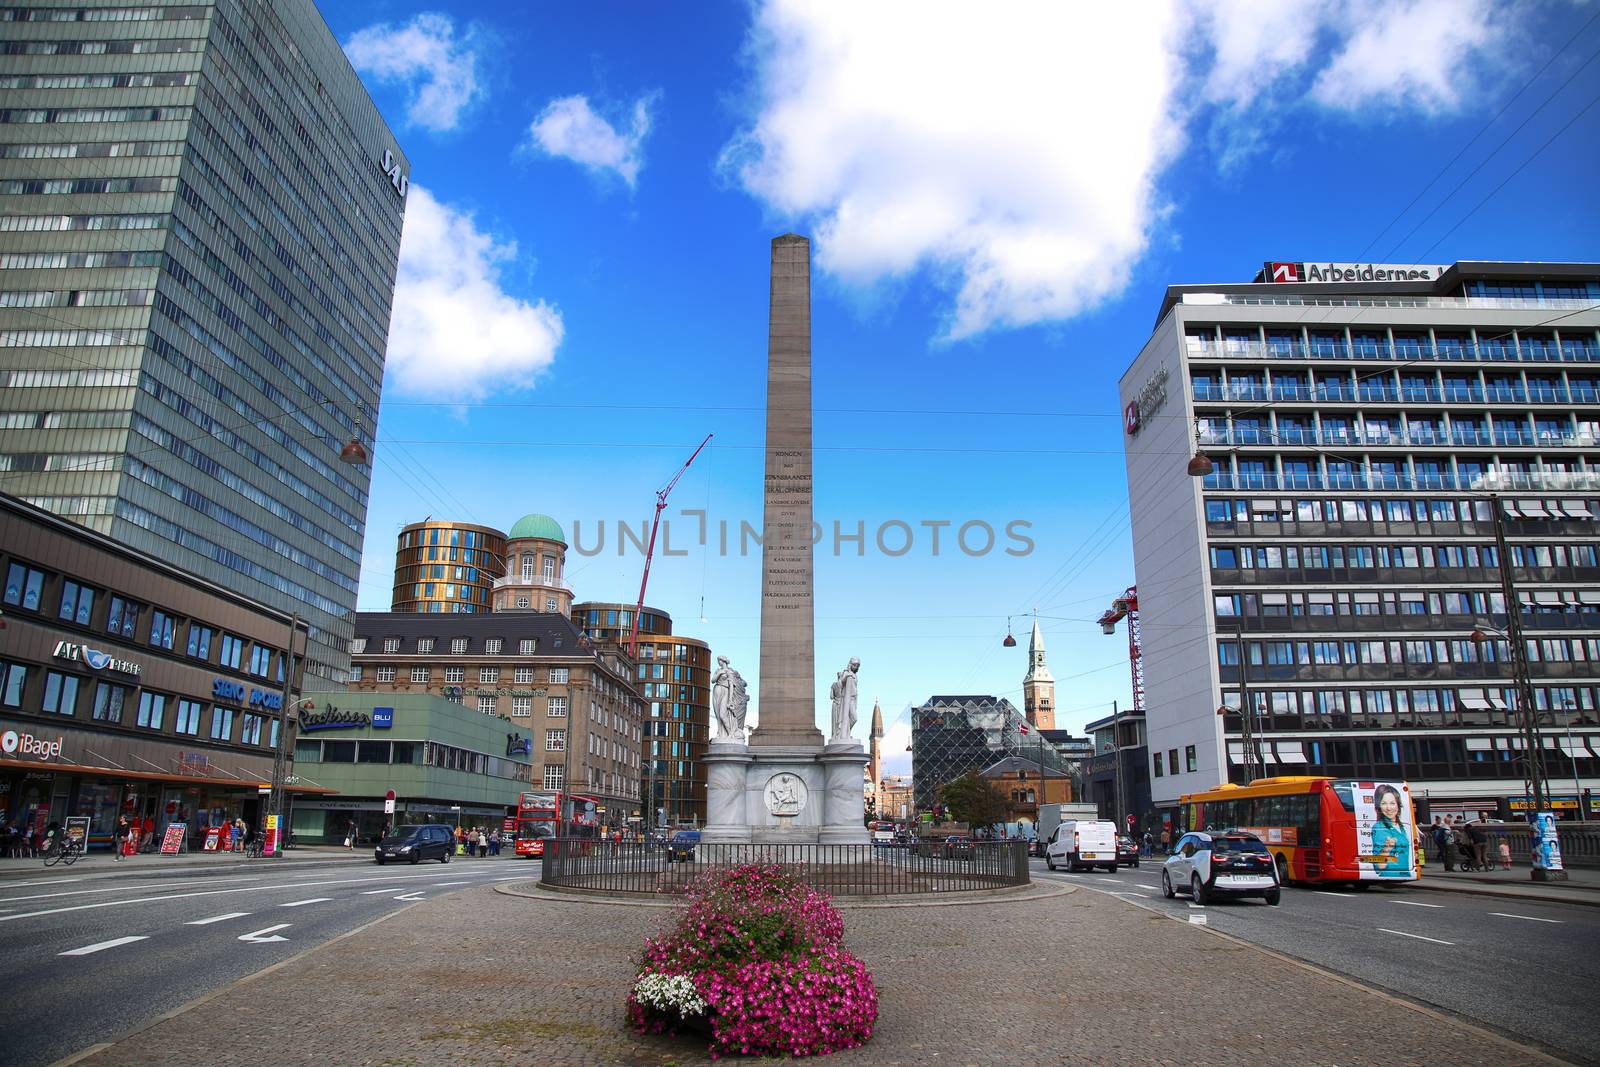 COPENHAGEN, DENMARK - AUGUST 16, 2016: The Liberty Memorial is placed on Vesterbrogade, and was erected in 1779. year in Copenhagen, Denmark on August 16, 2016.